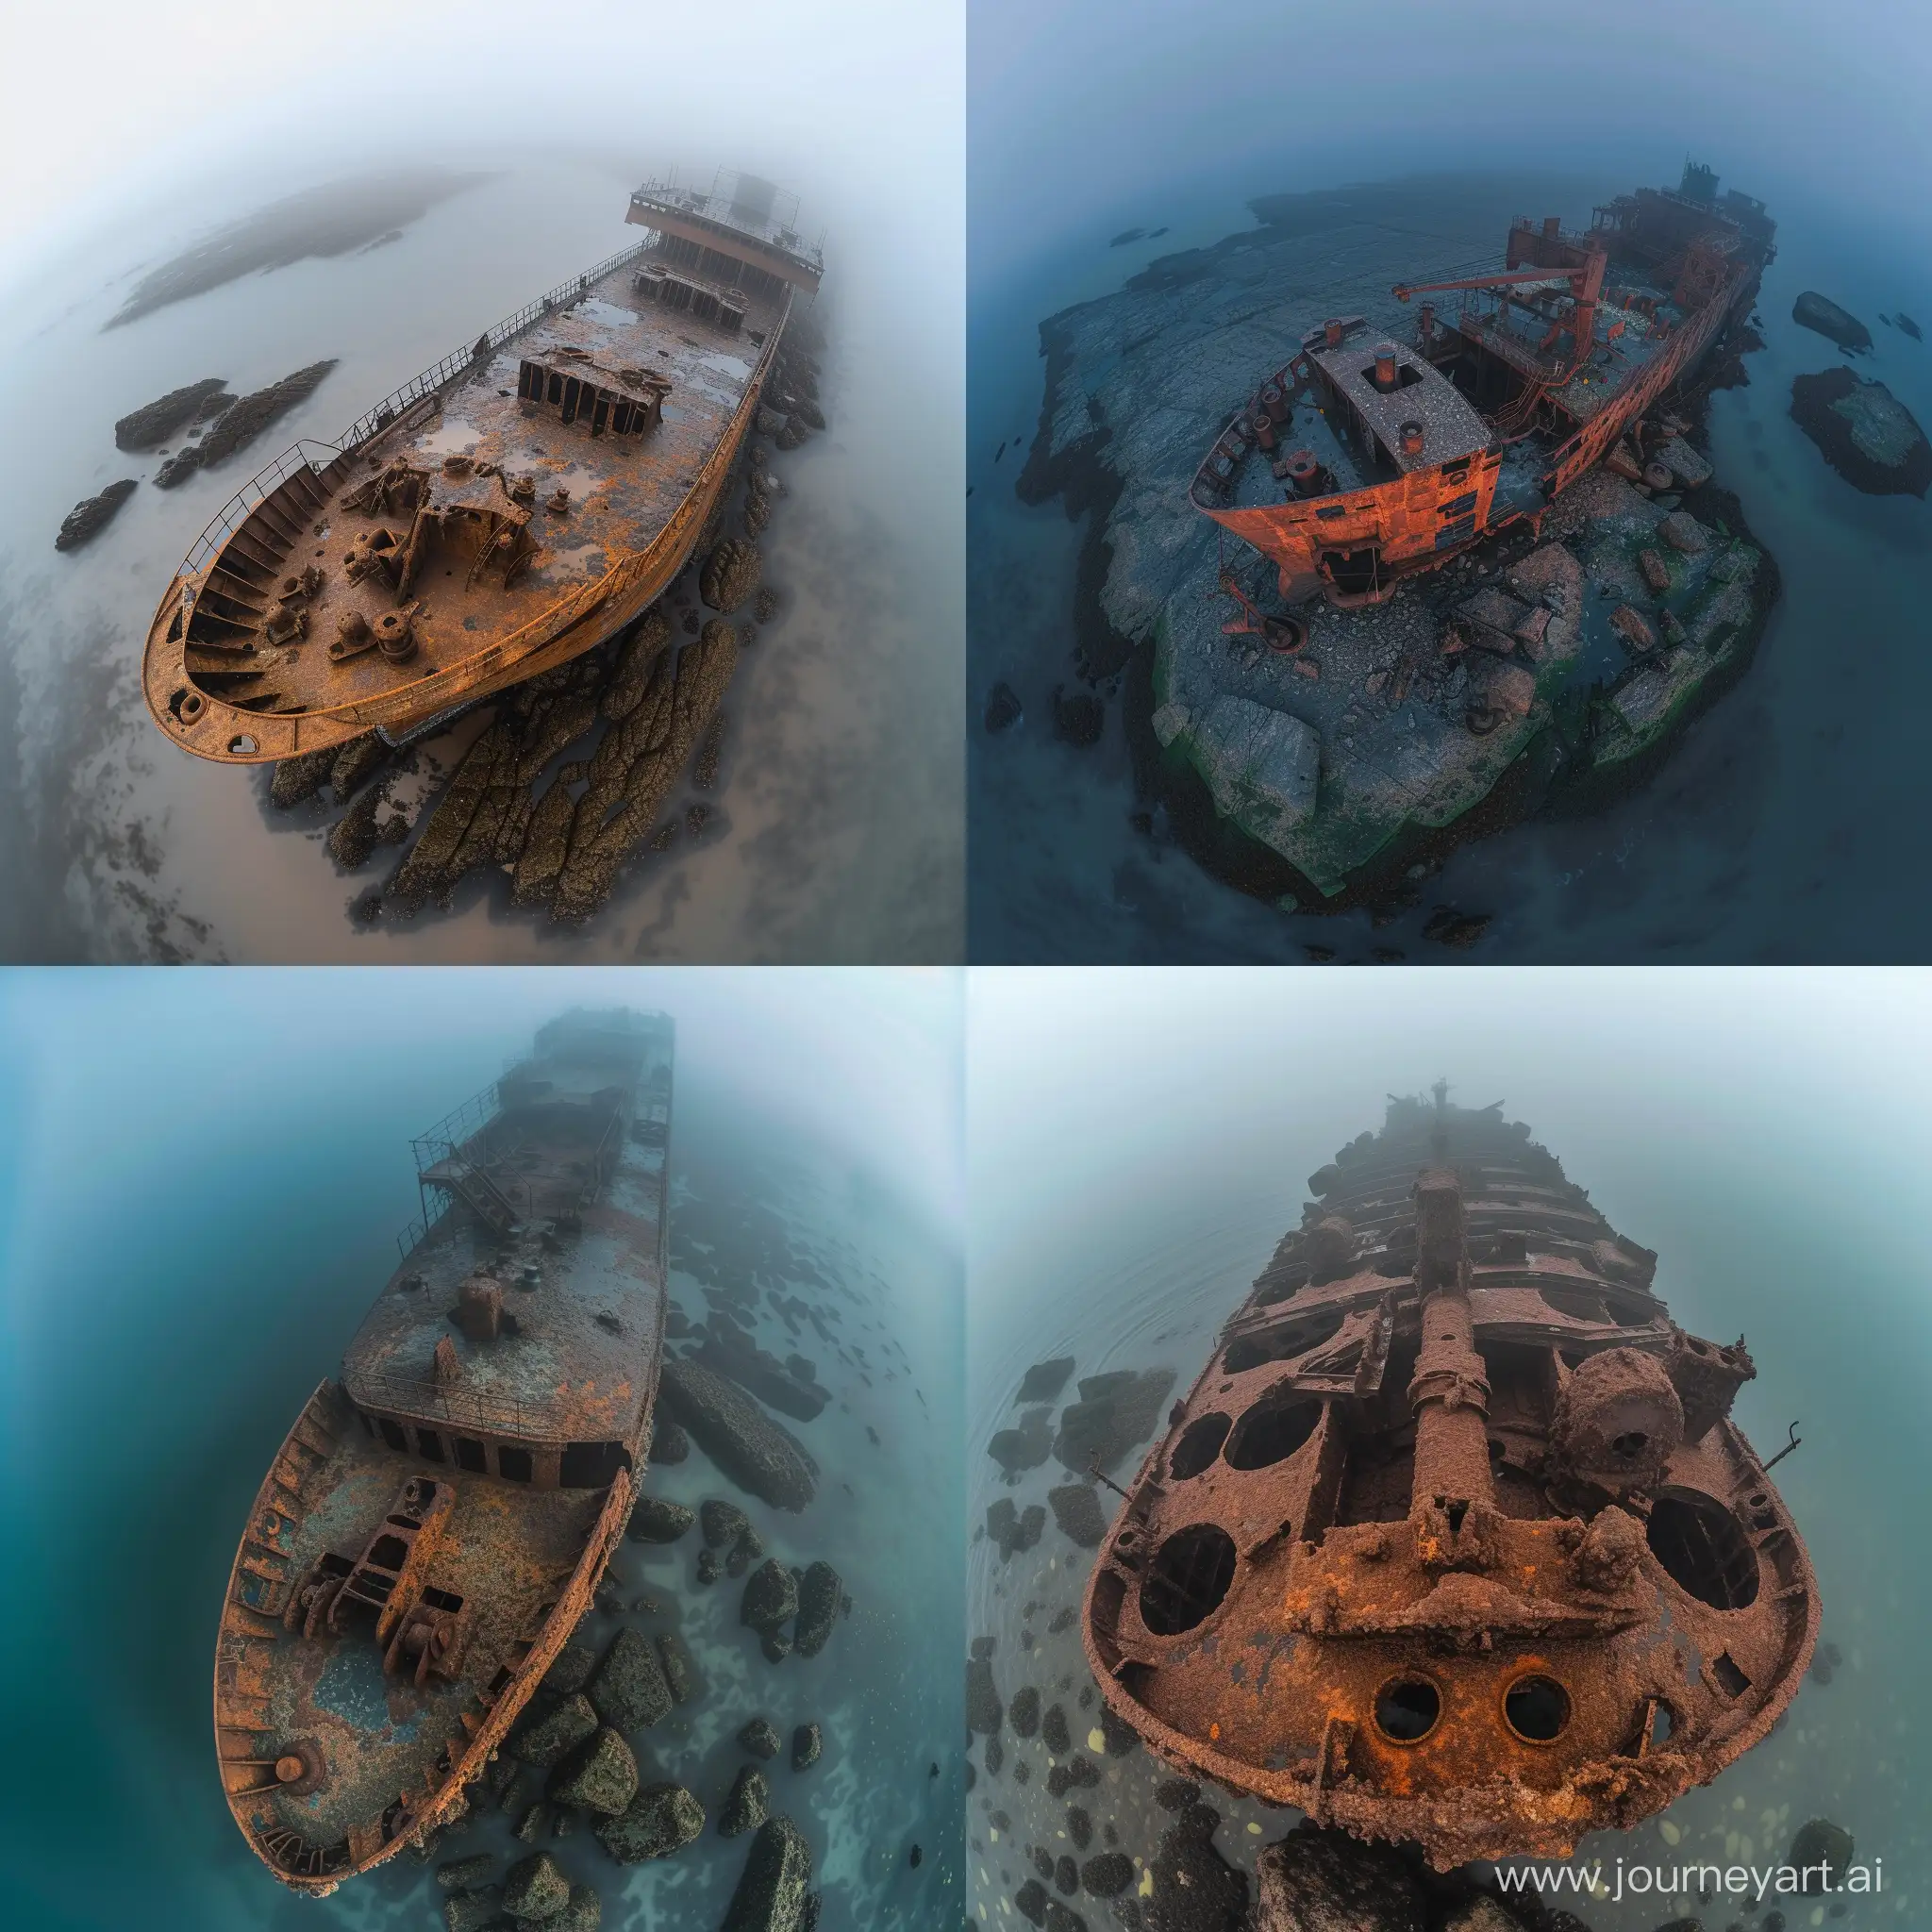 Eerie-Dawn-Aerial-View-of-Rusty-Shipwreck-on-Gneiss-Boulders-Amidst-Foggy-Ocean